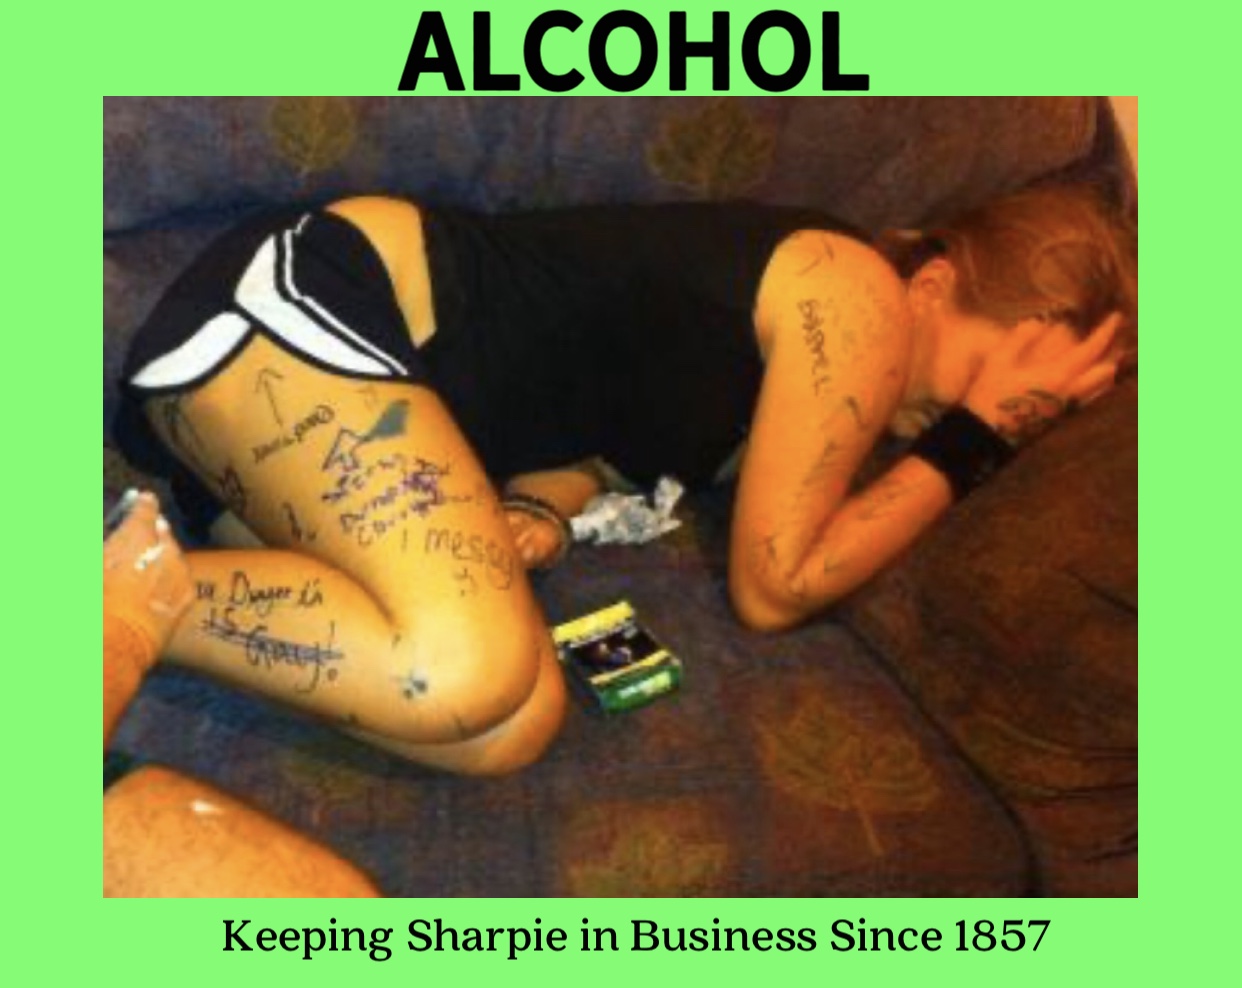 conseil général 13 - Alcohol is too Keeping Sharpie in Business Since 1857